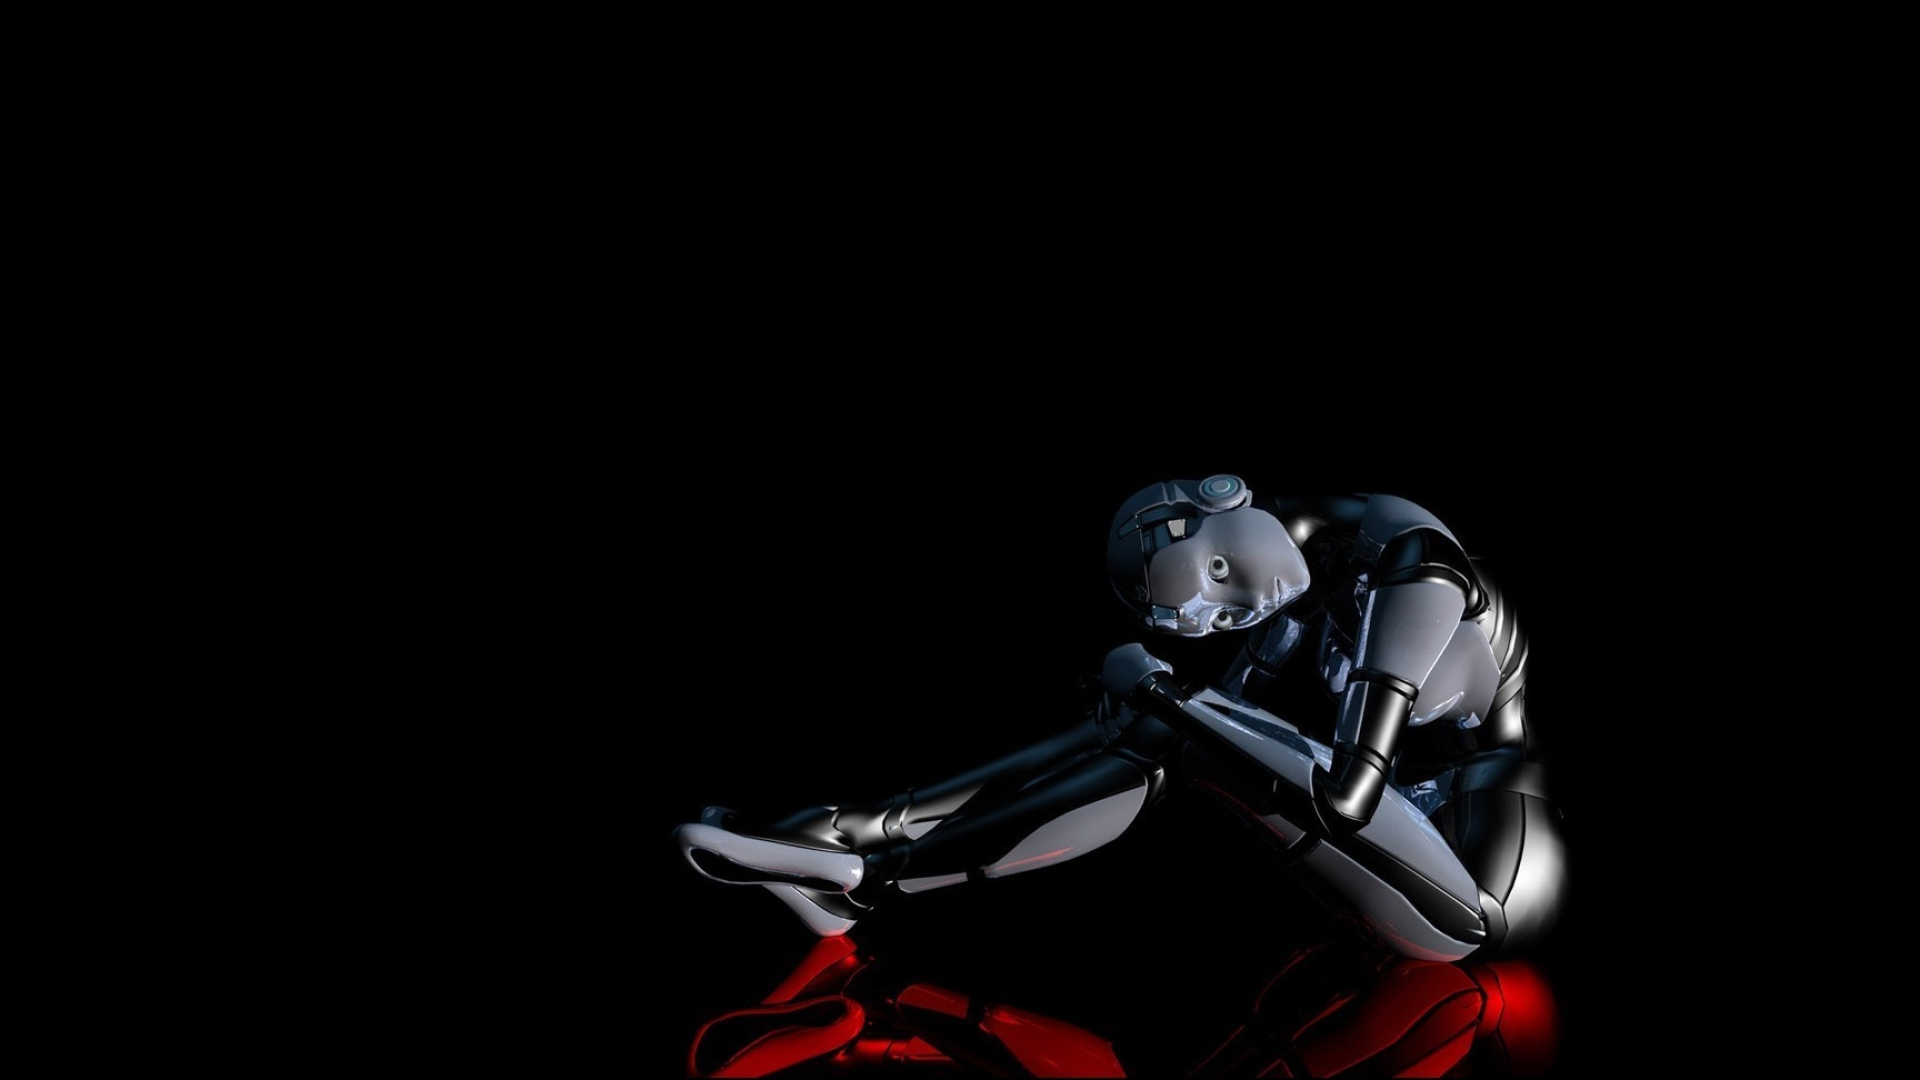 Robot: Female cyborg, Artificial intelligence, Smoothly perform the natural movements. 1920x1080 Full HD Background.